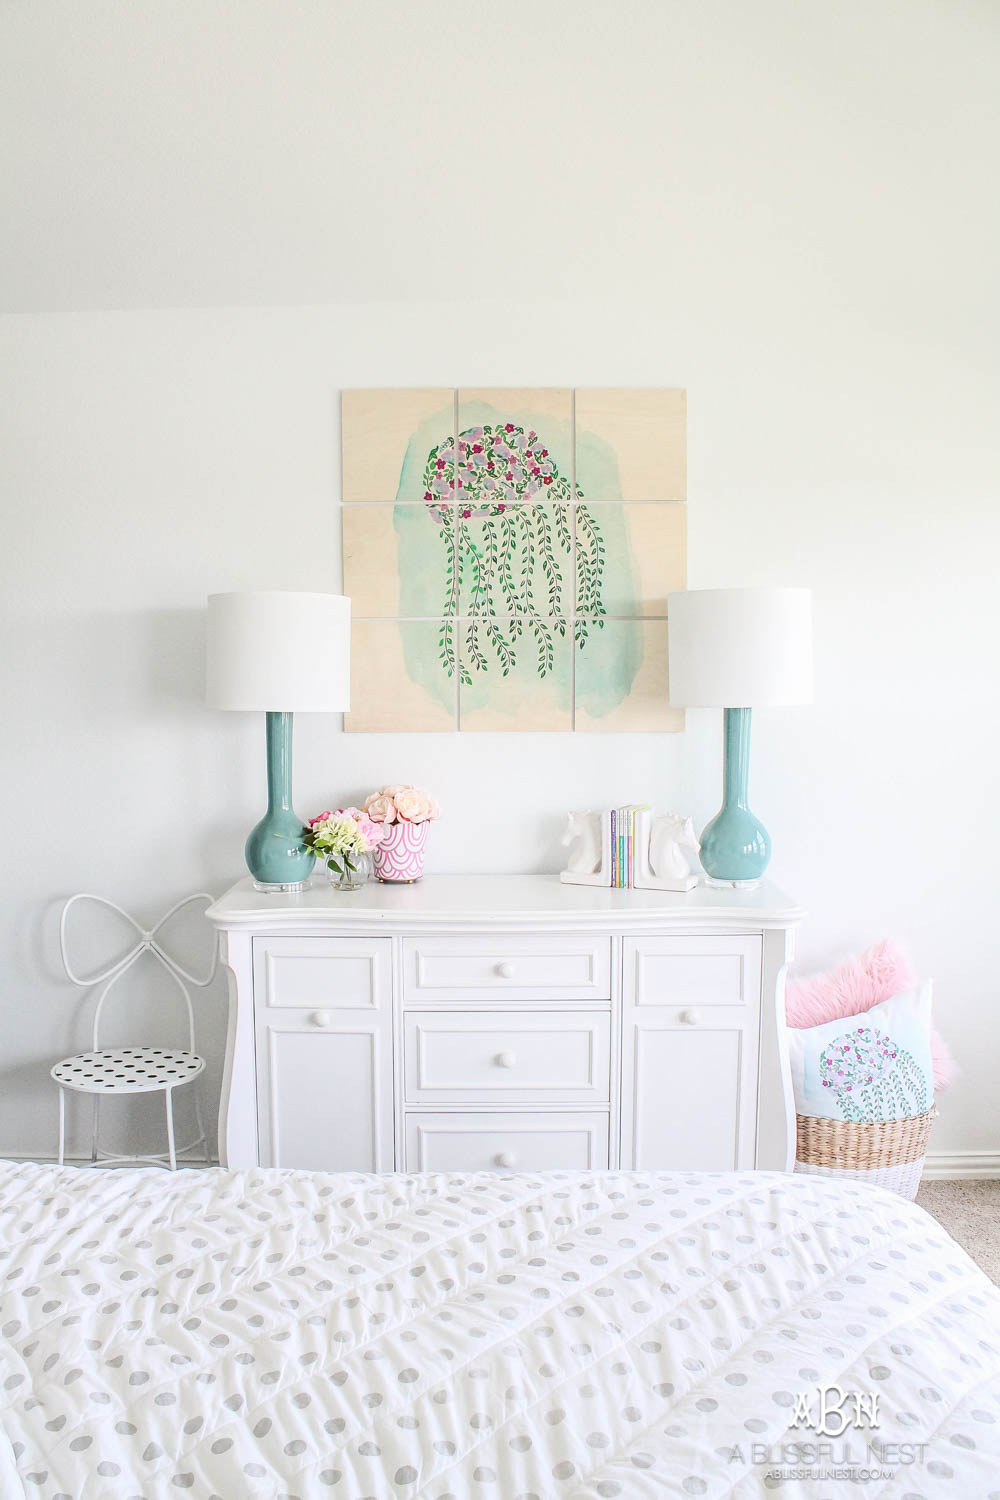 The sweetest little girls room updated with custom wall artwork! #ABlissfulNest #ad #society6